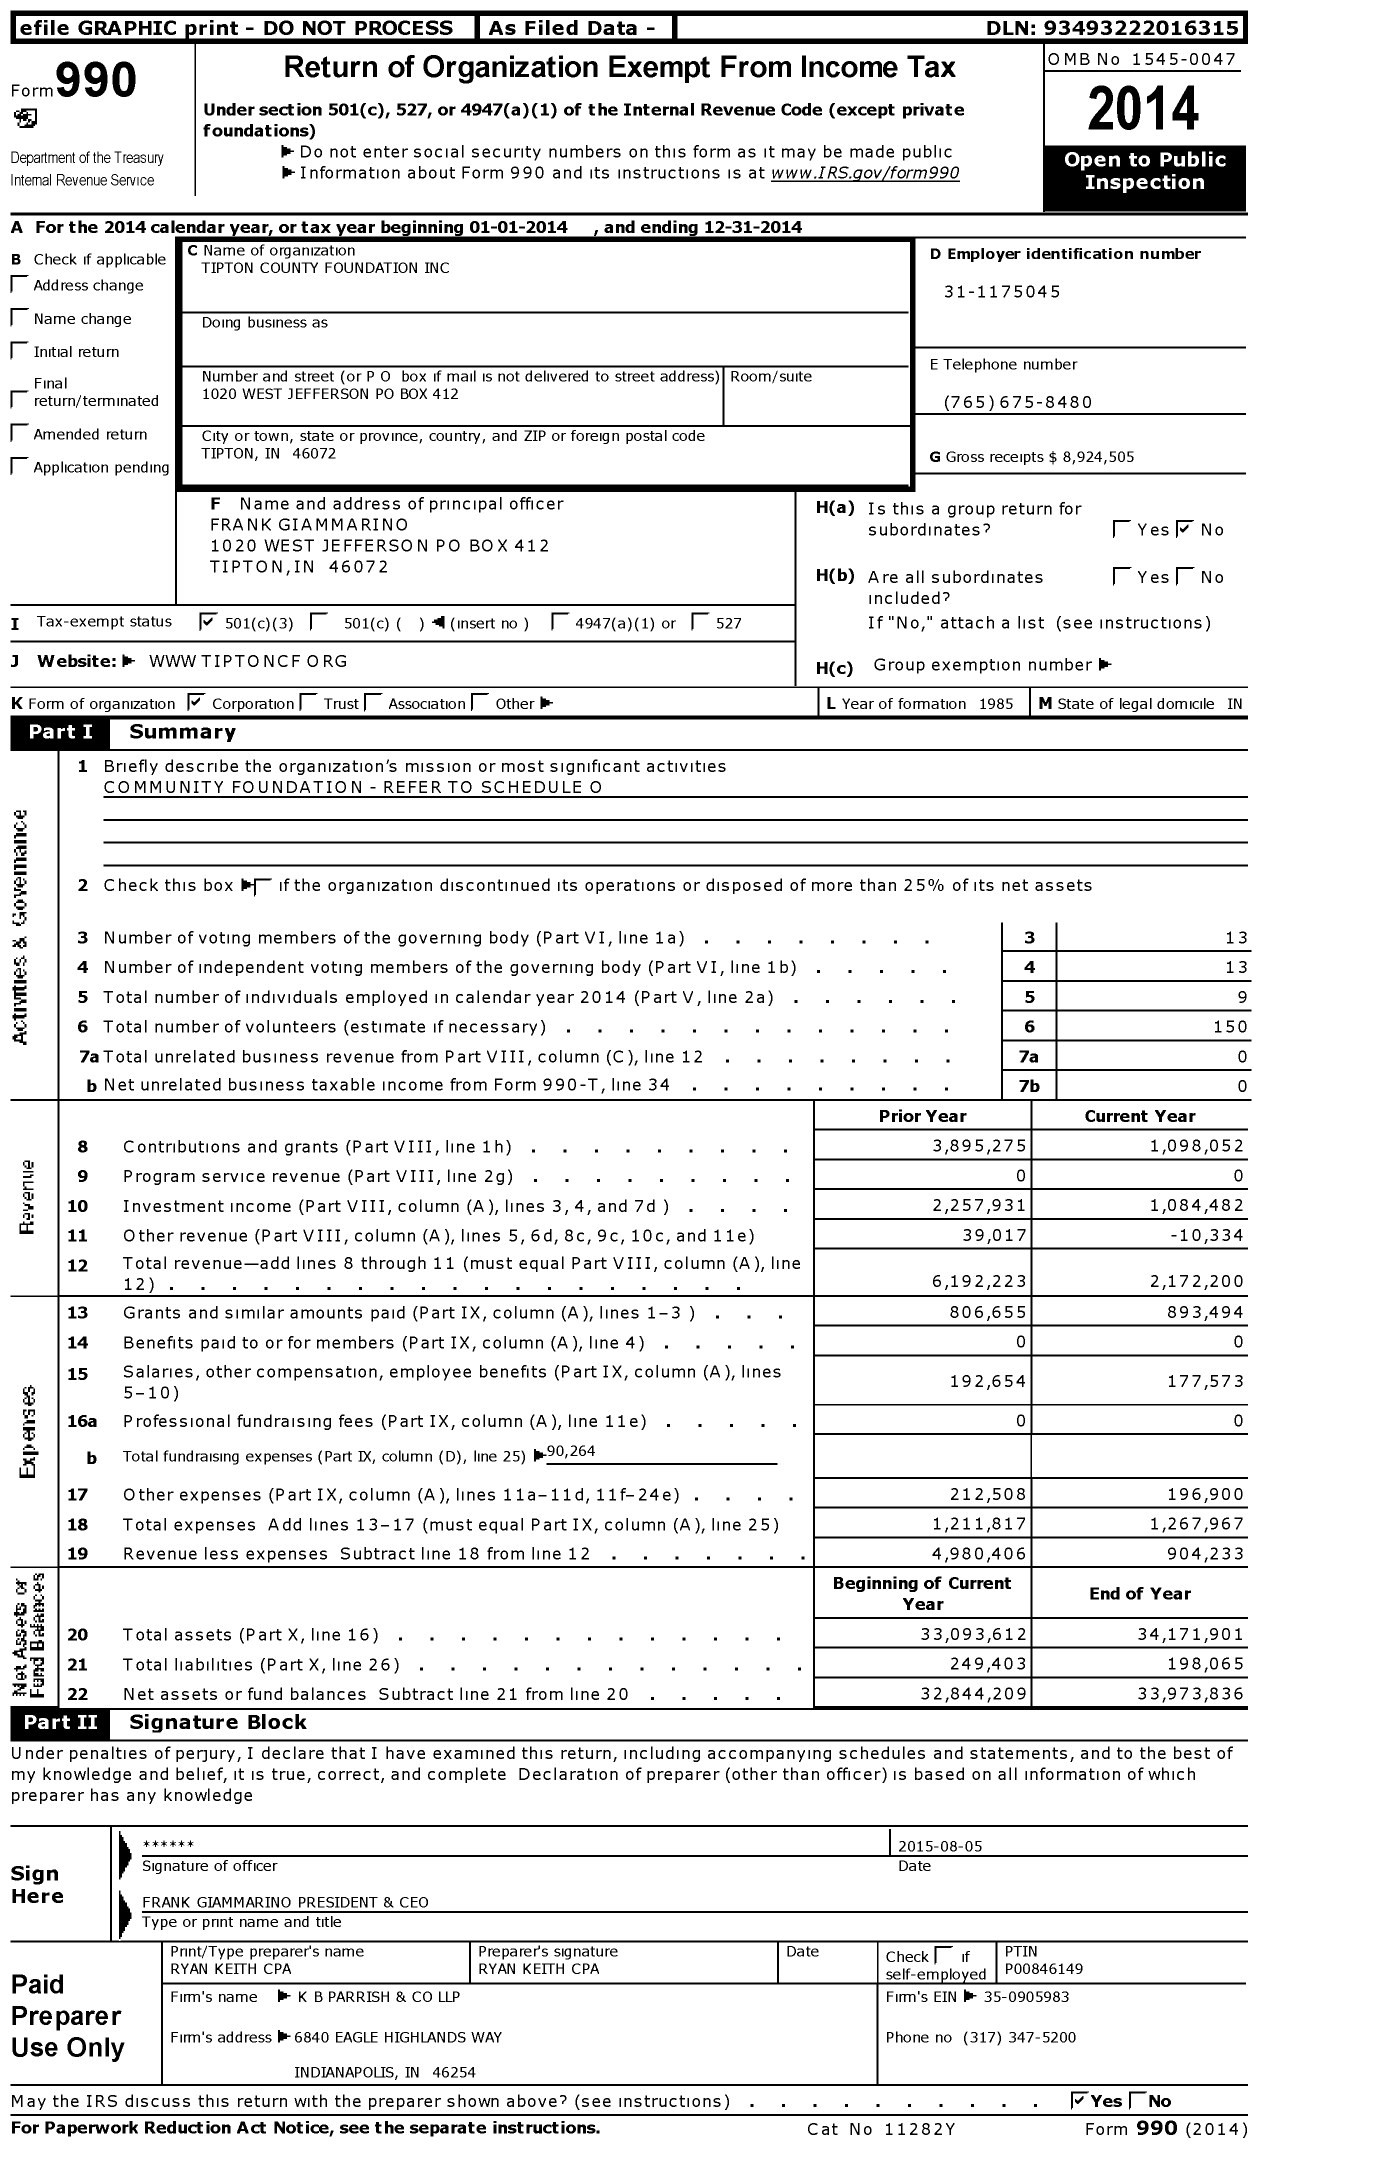 Image of first page of 2014 Form 990 for Tipton County Foundation (TCF)